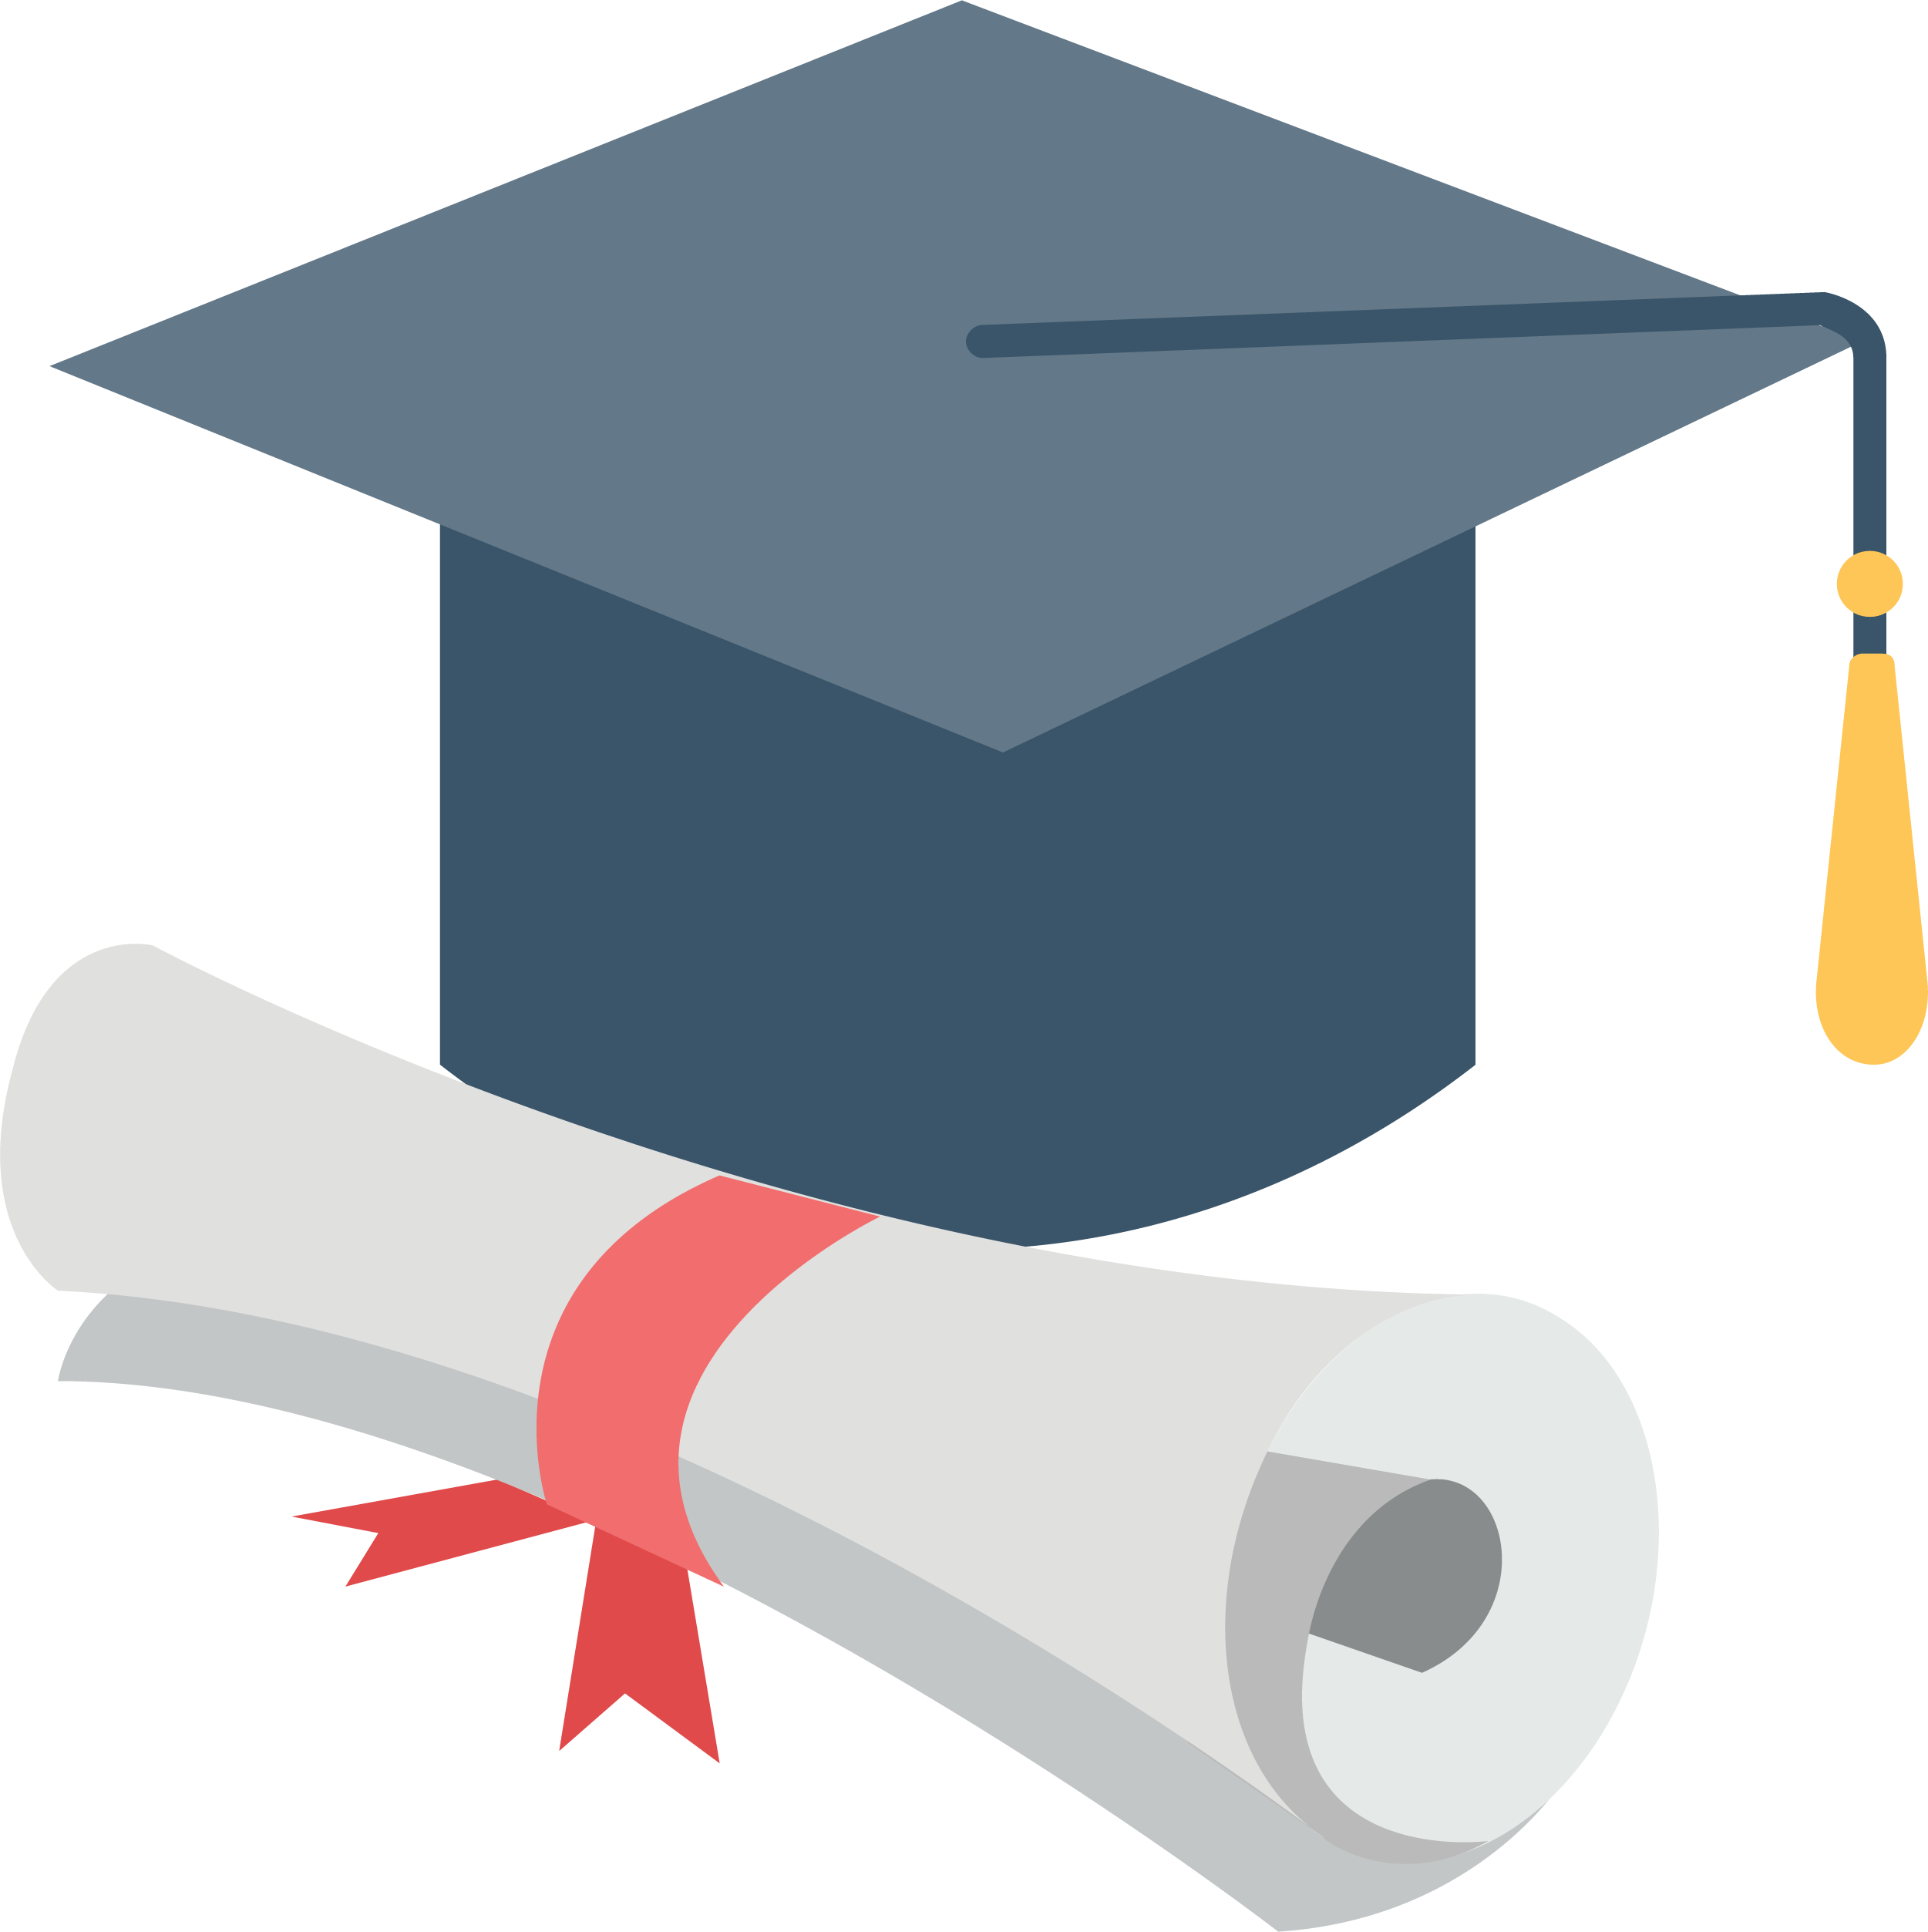 Download Ceremony And Certificate Degree Cap Graduation Bachelor Hq Png